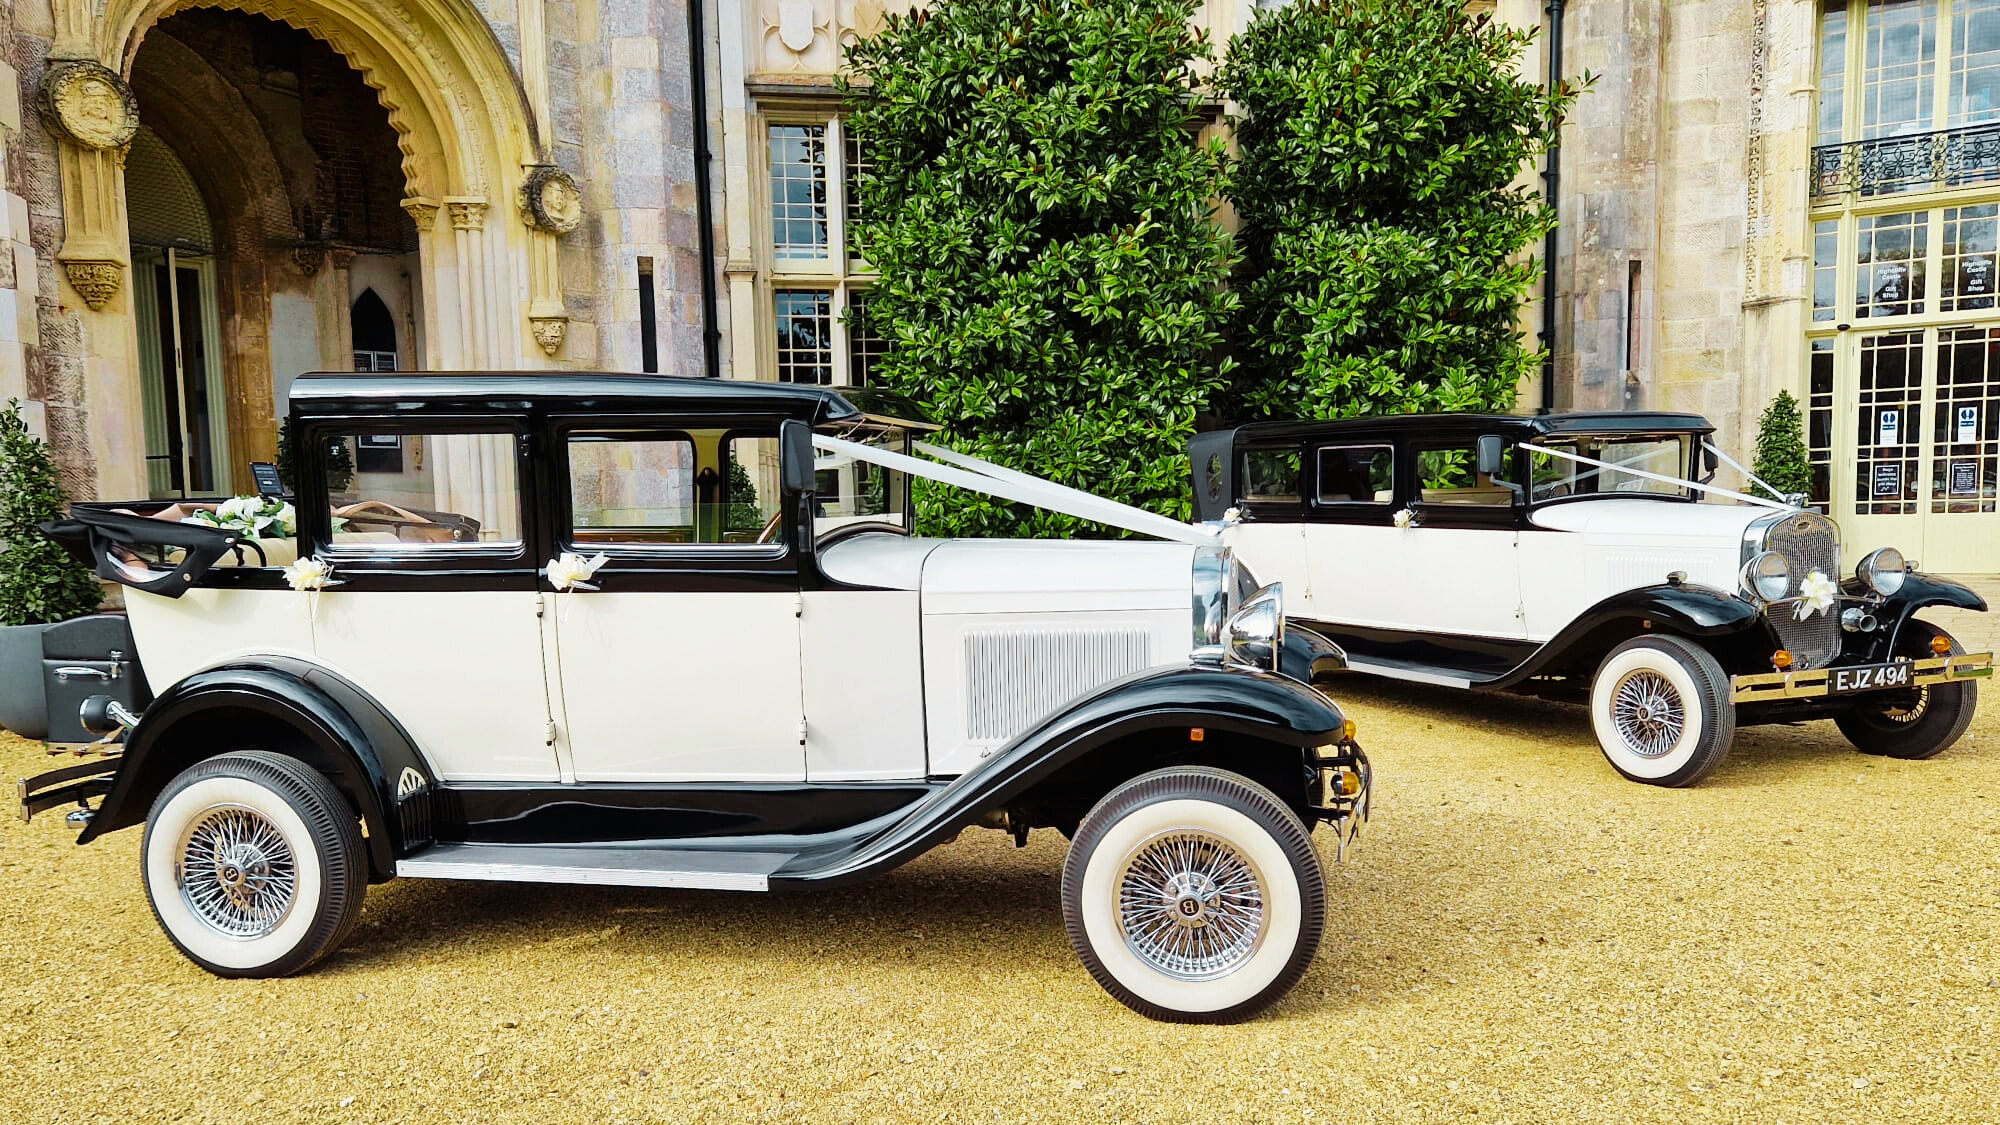 Two matching vintage wedding cars decorated with matching white ribbons. Vehicles are parked at the front entrance of a local wedding venue in Moreton.